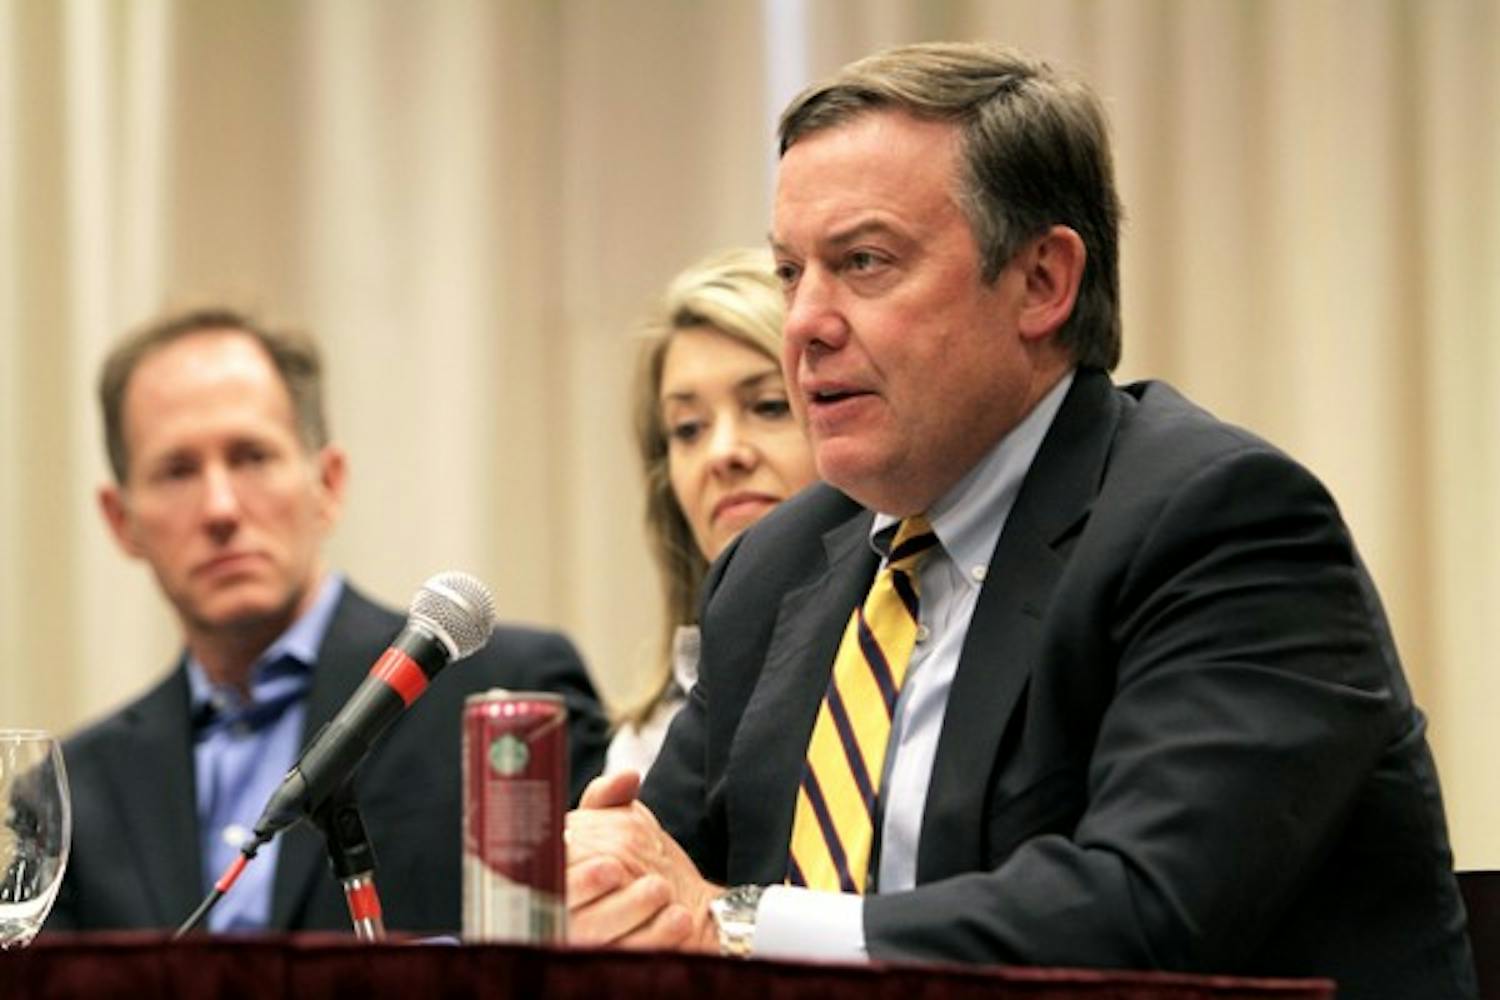 President Michael Crow speaks at a hearing about the proposed 3 percent tuition increase for ASU students next year. (Photo by Sean Logan)